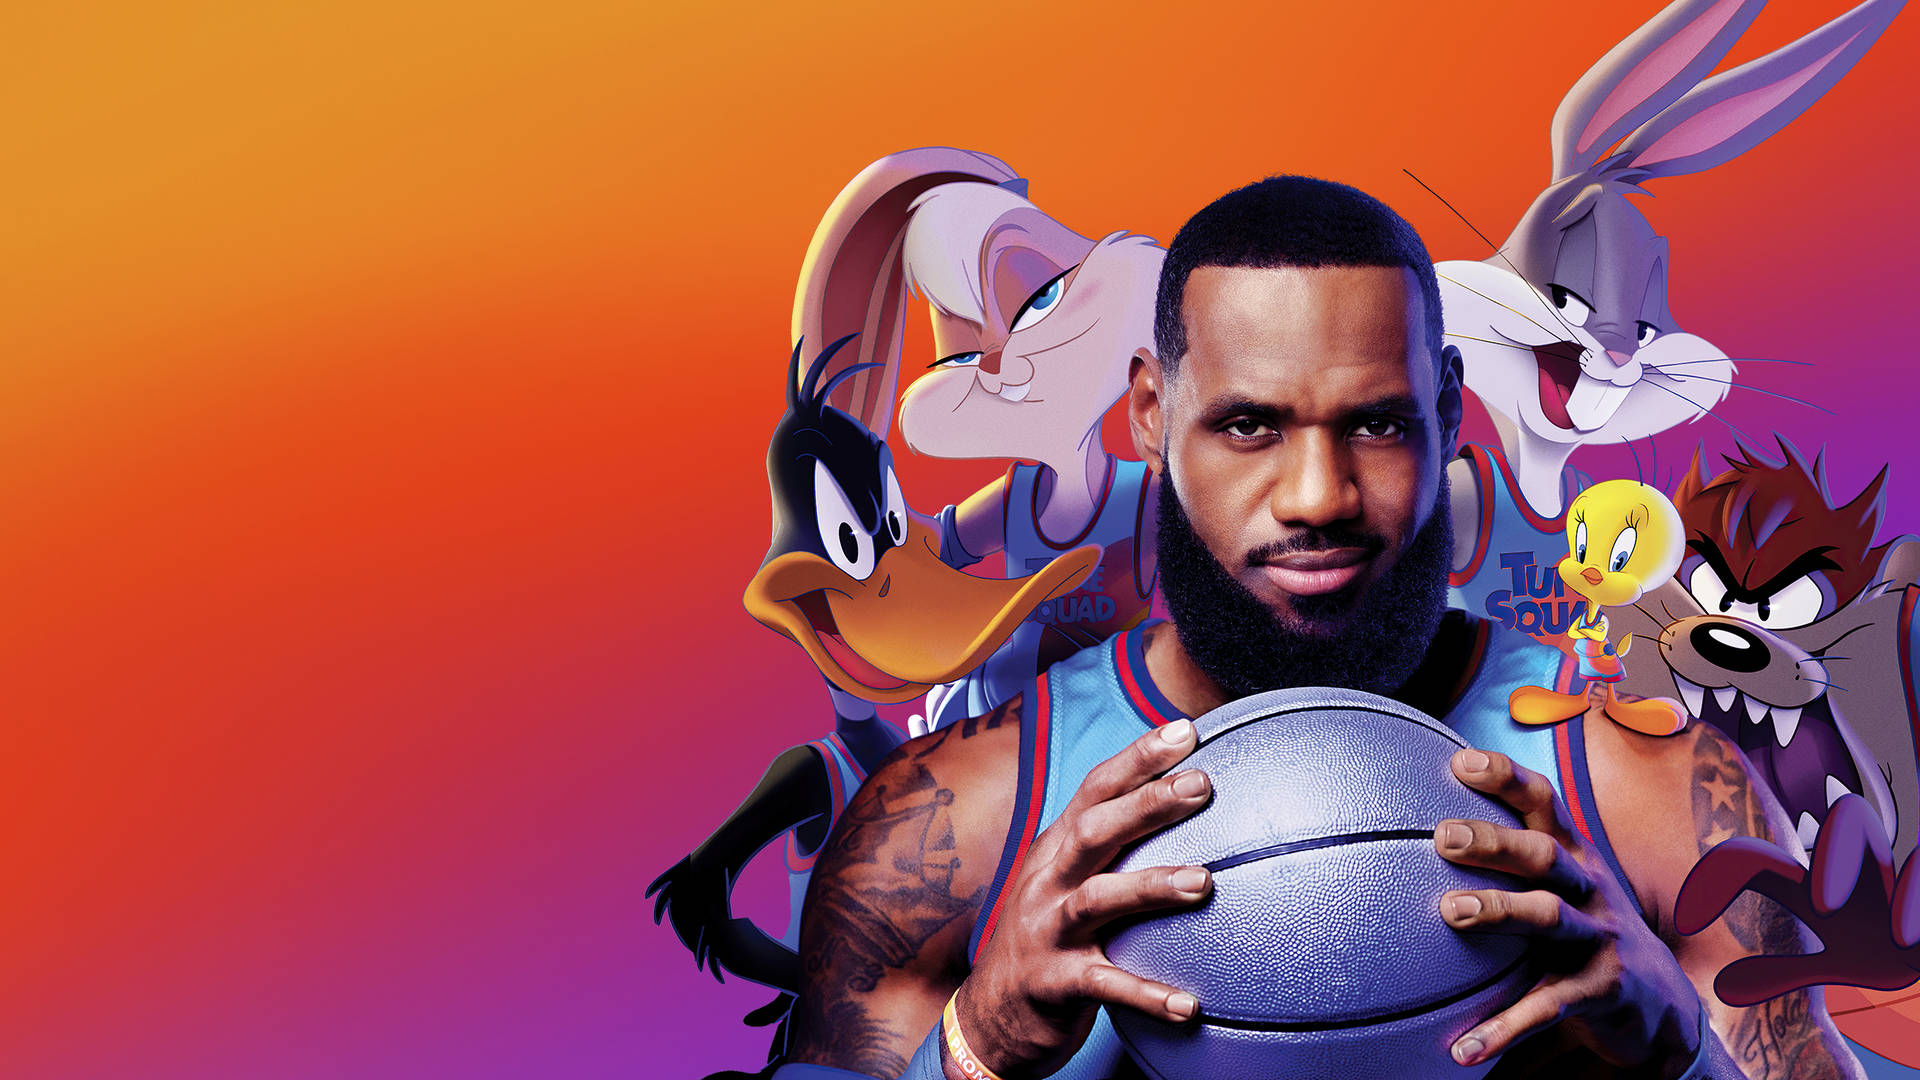 Jam Along With Space Jam 2 Wallpaper